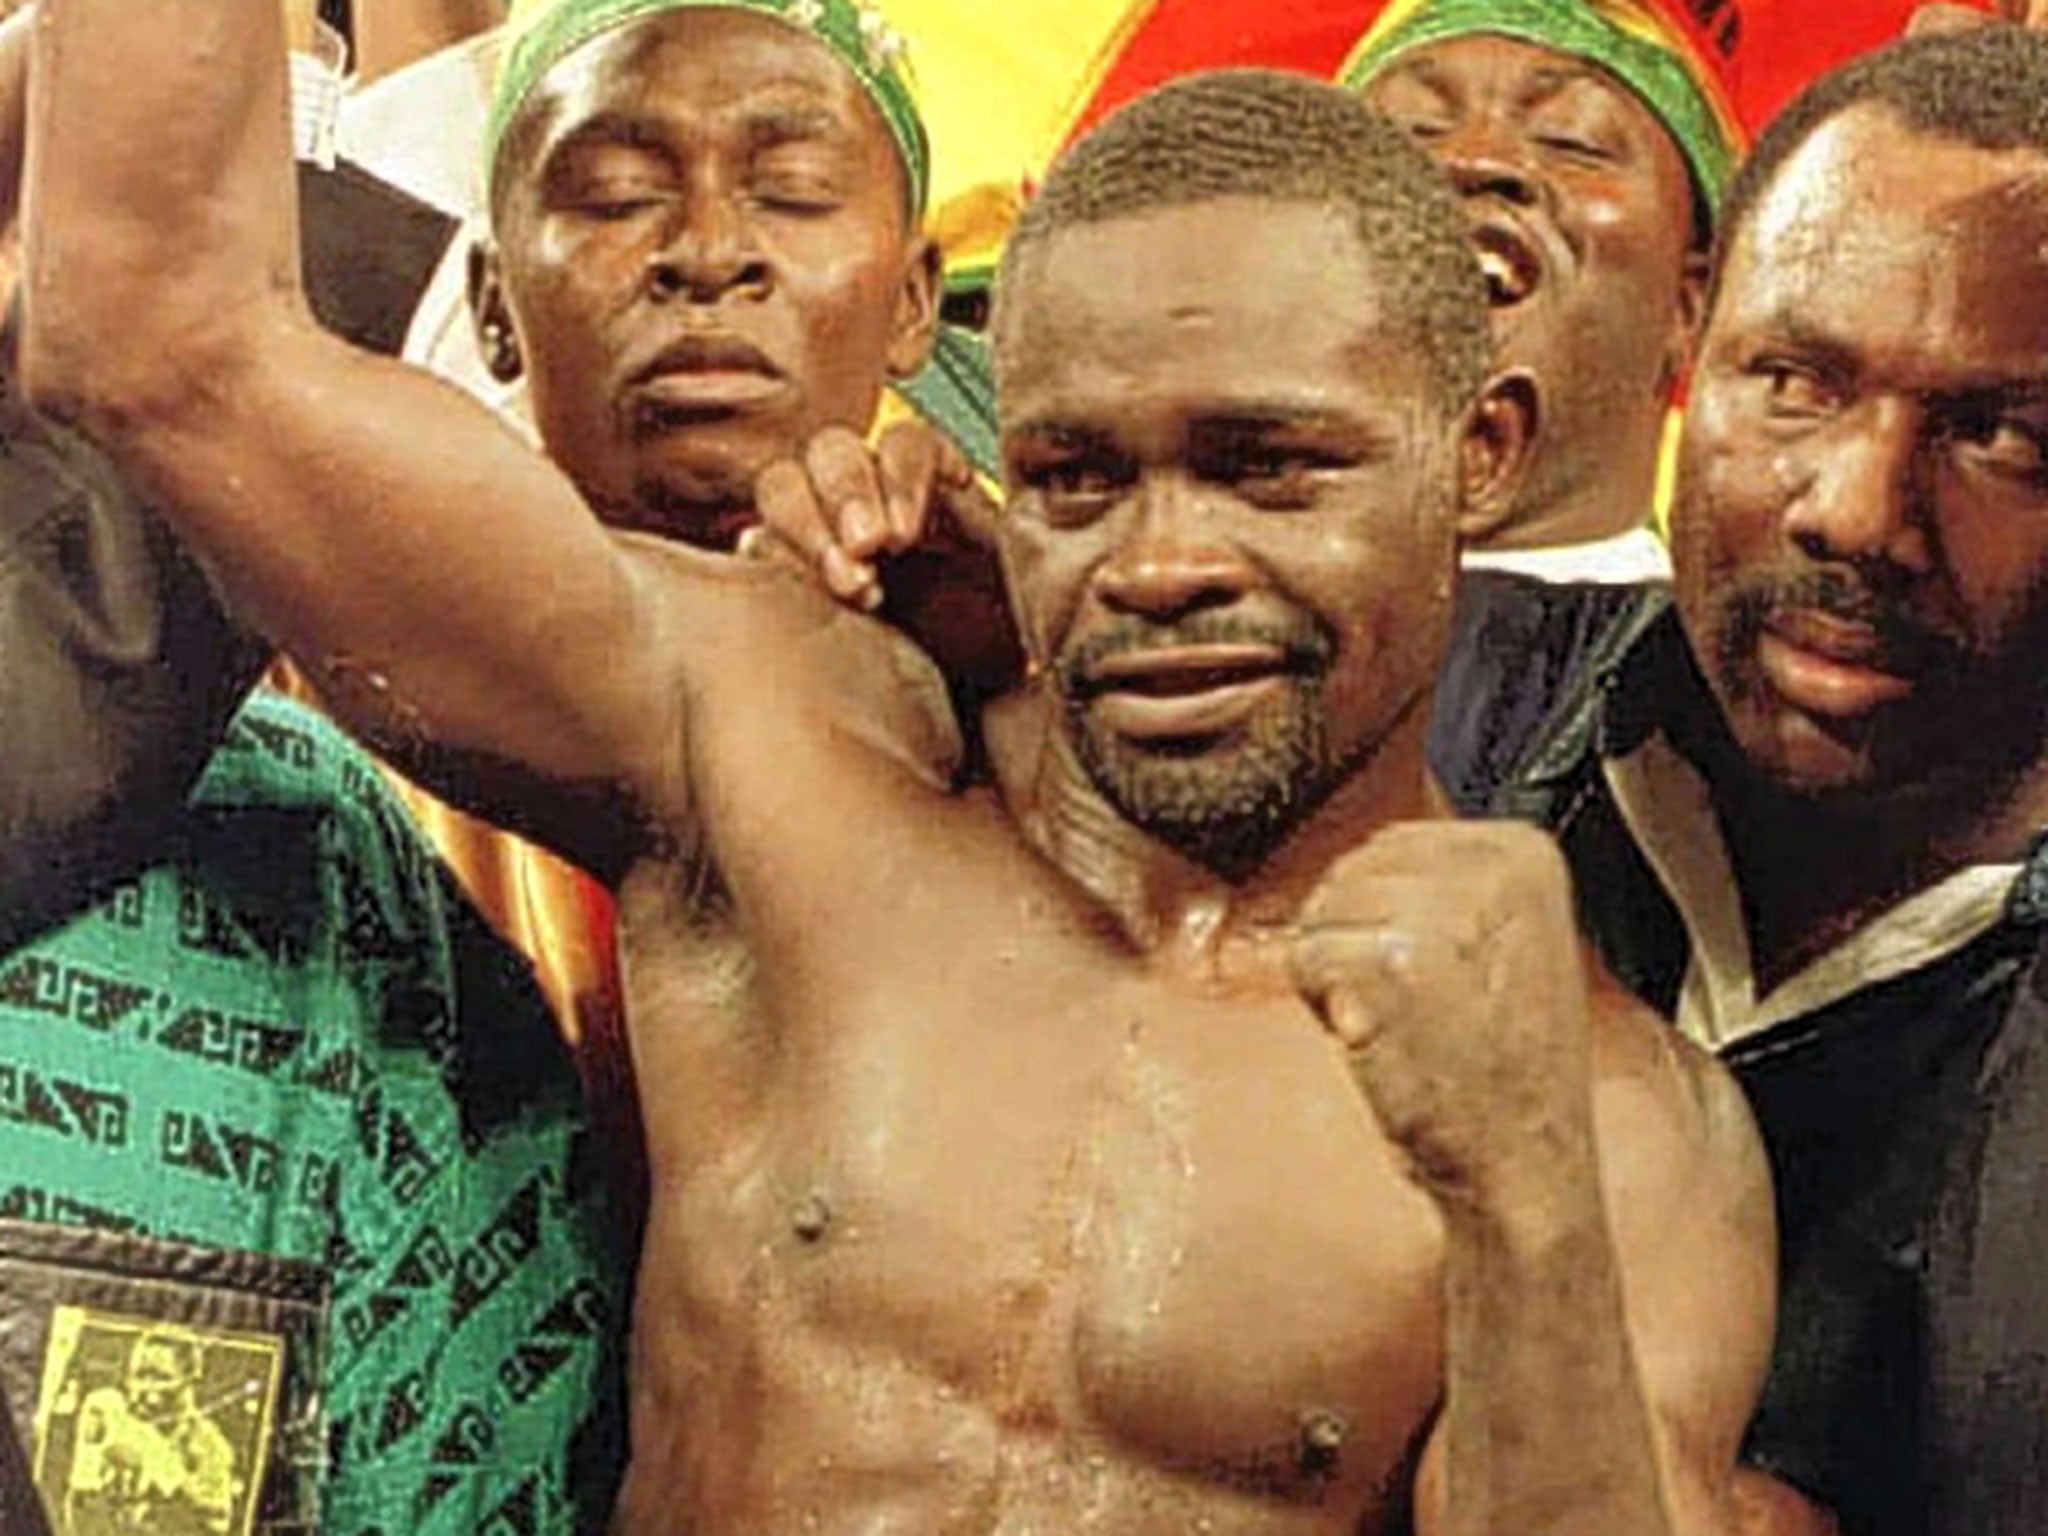 Why has the production line of great African fighters like Azumah Nelson tailed off?